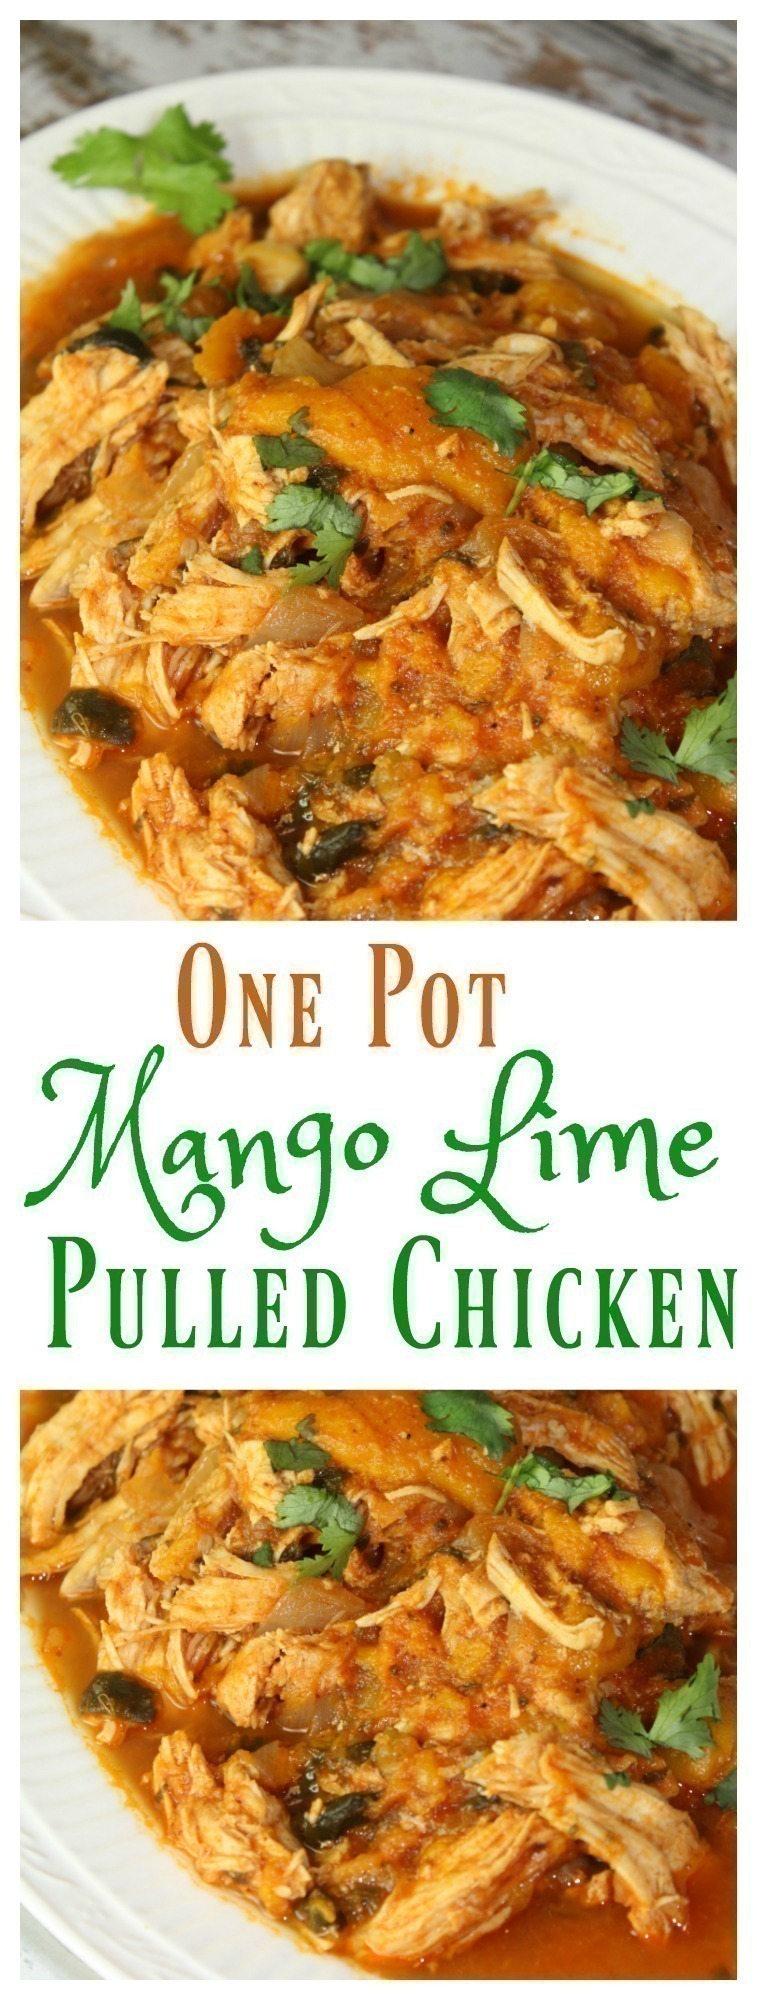 This Mango Lime Pulled Chicken is a one pot meal of shredded chicken that bathes in a fiery sauce of mangoes, tomatoes, and spices that's wonderful served over rice.